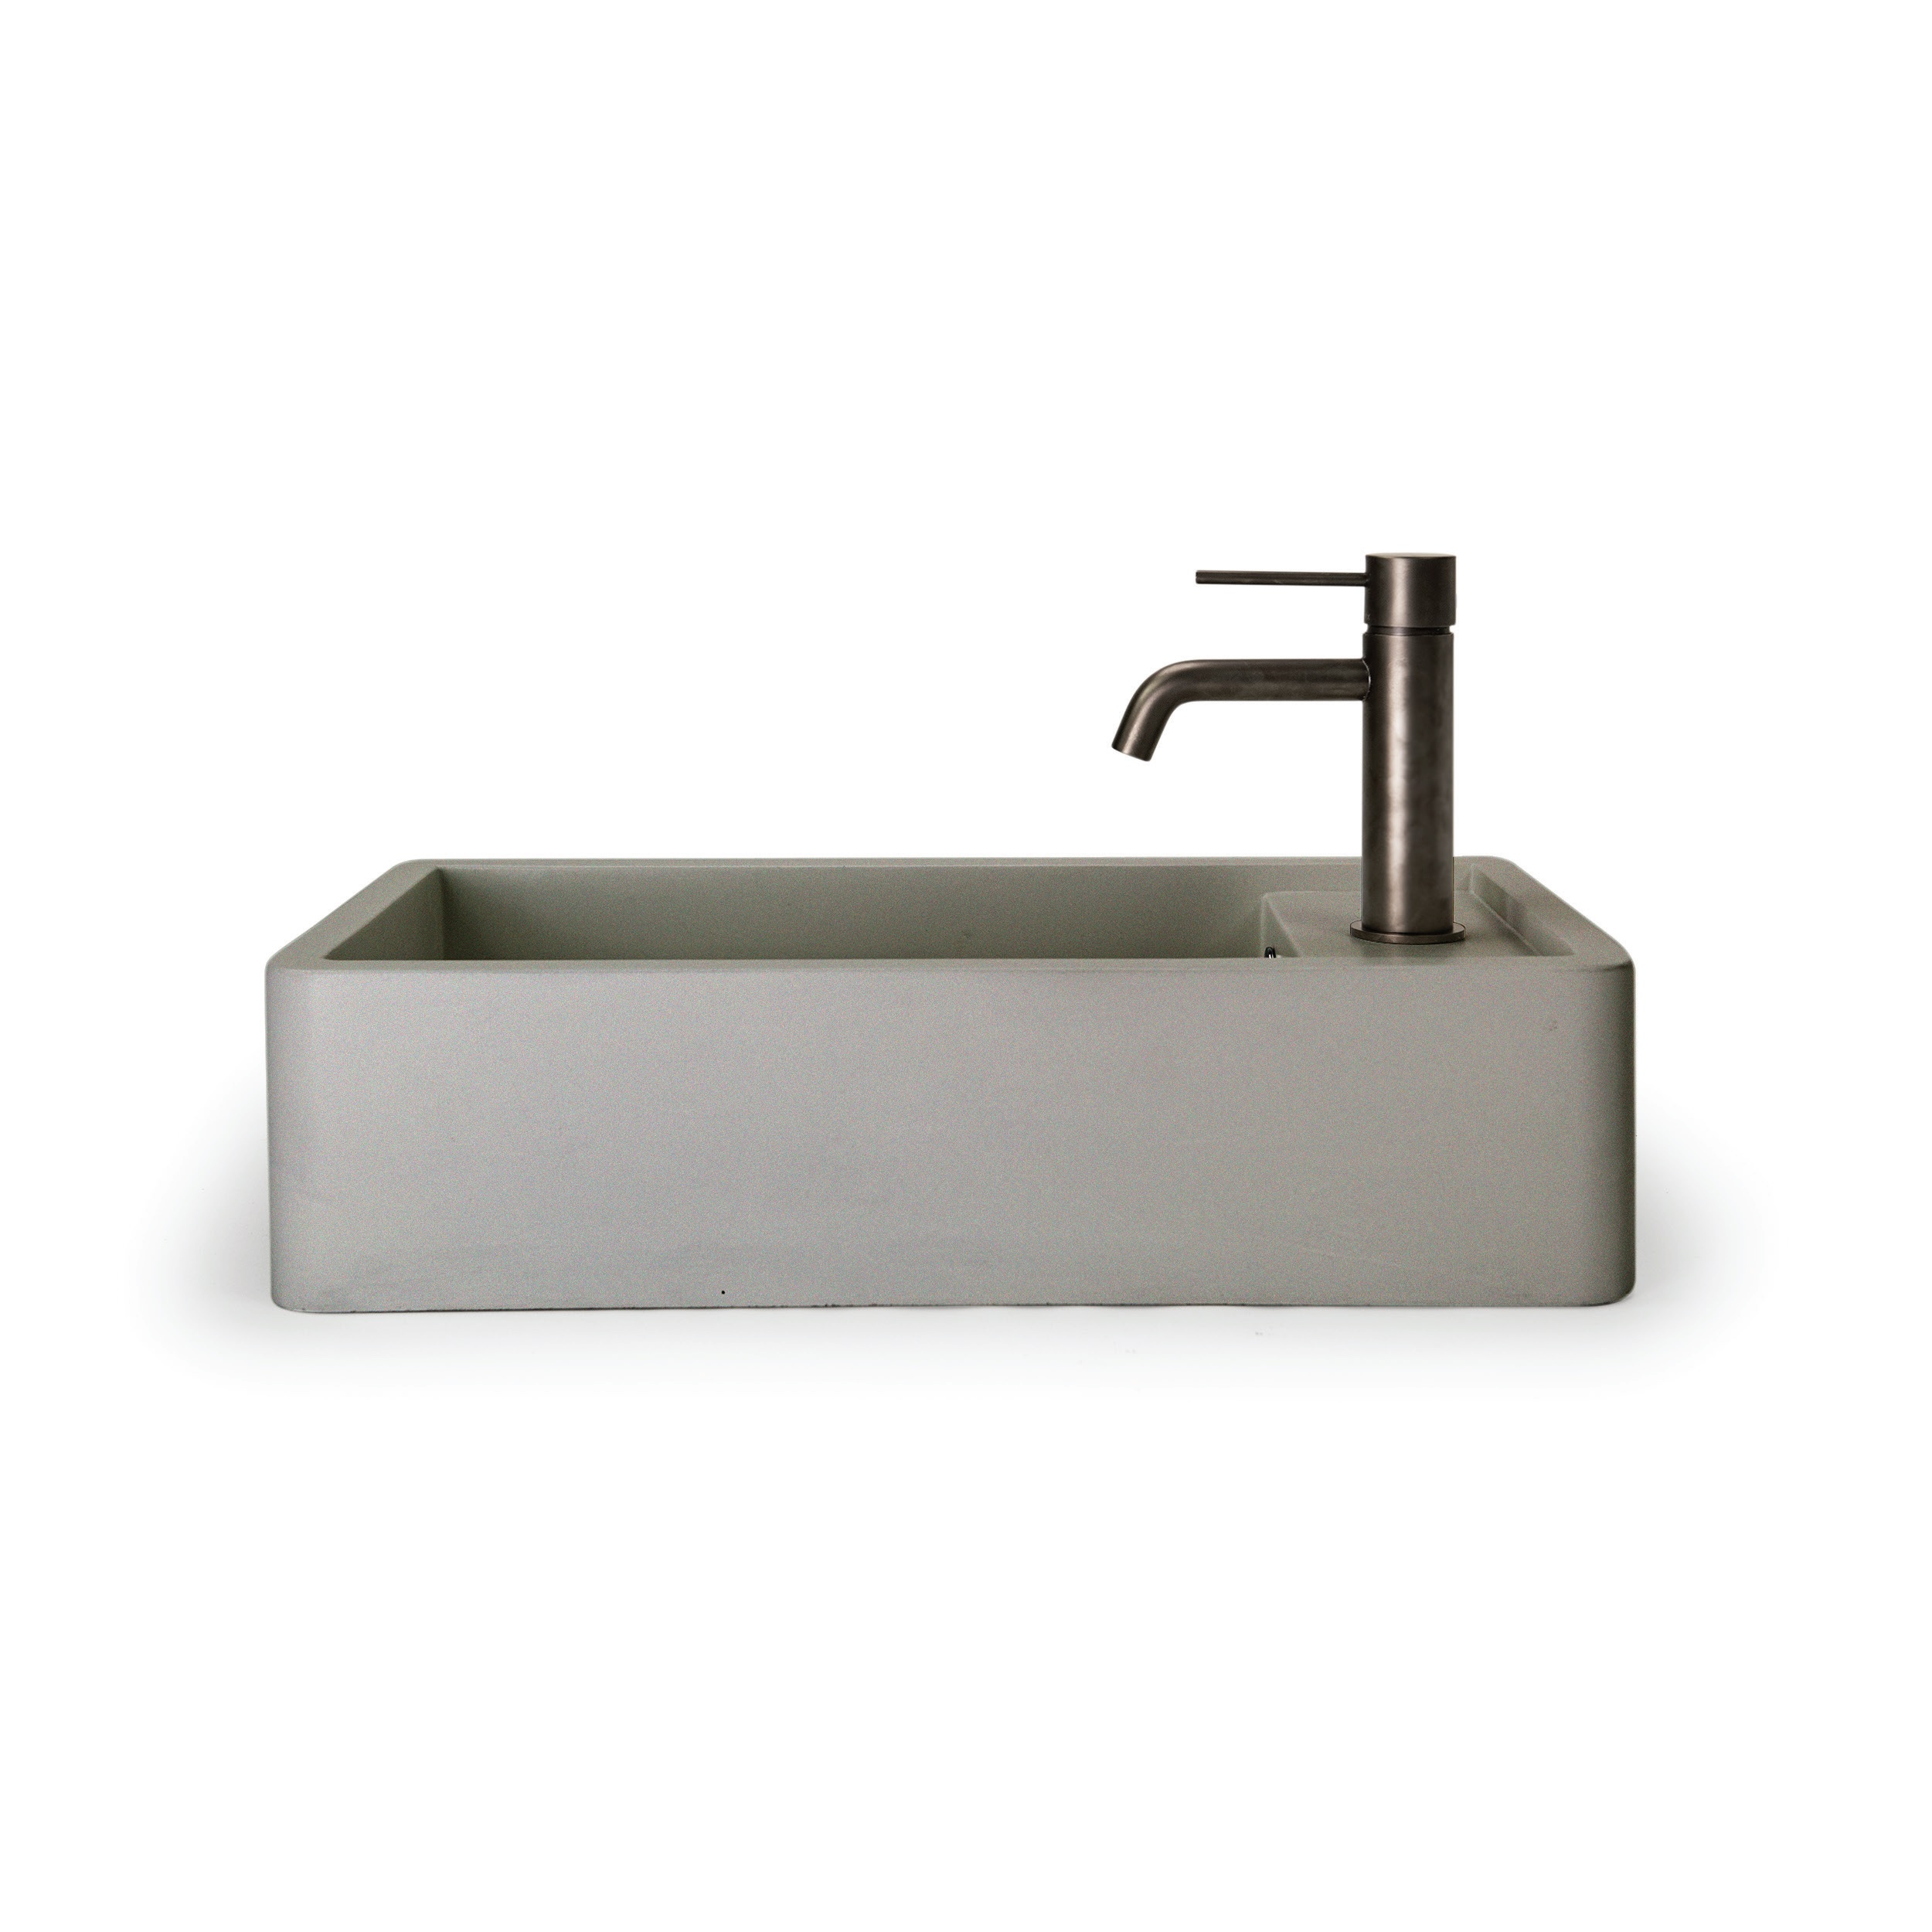 OVERFLOW BASINS COLLECTION BY NOOD CO